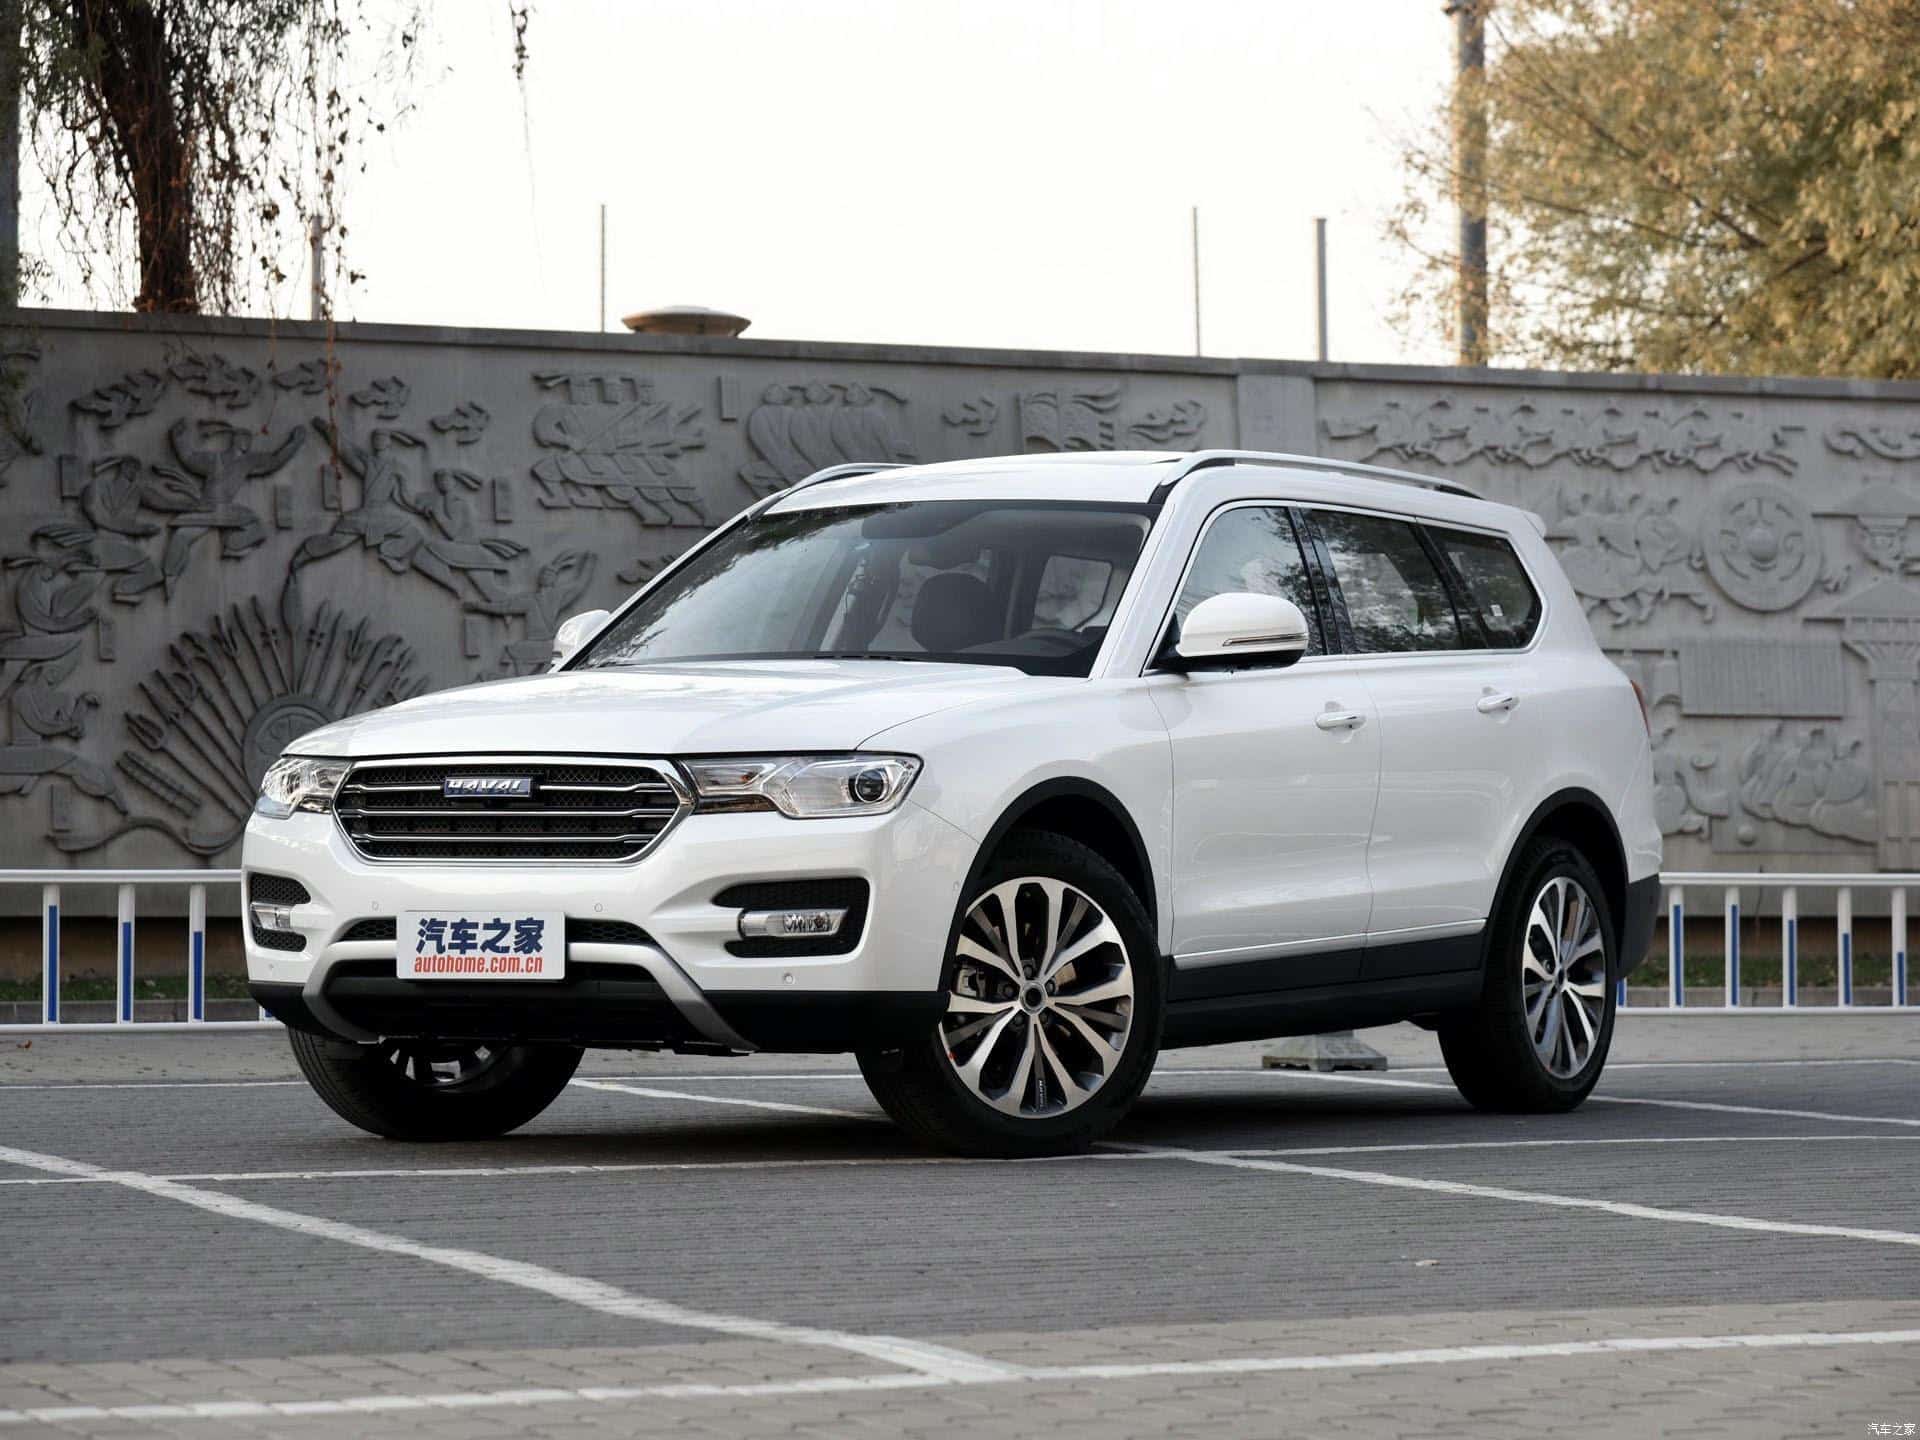 HAVAL HAVAL H7 L 2.0T GLS 6DCT 4X2 DIGNITY ▶ Impuesto Vehicular ≫